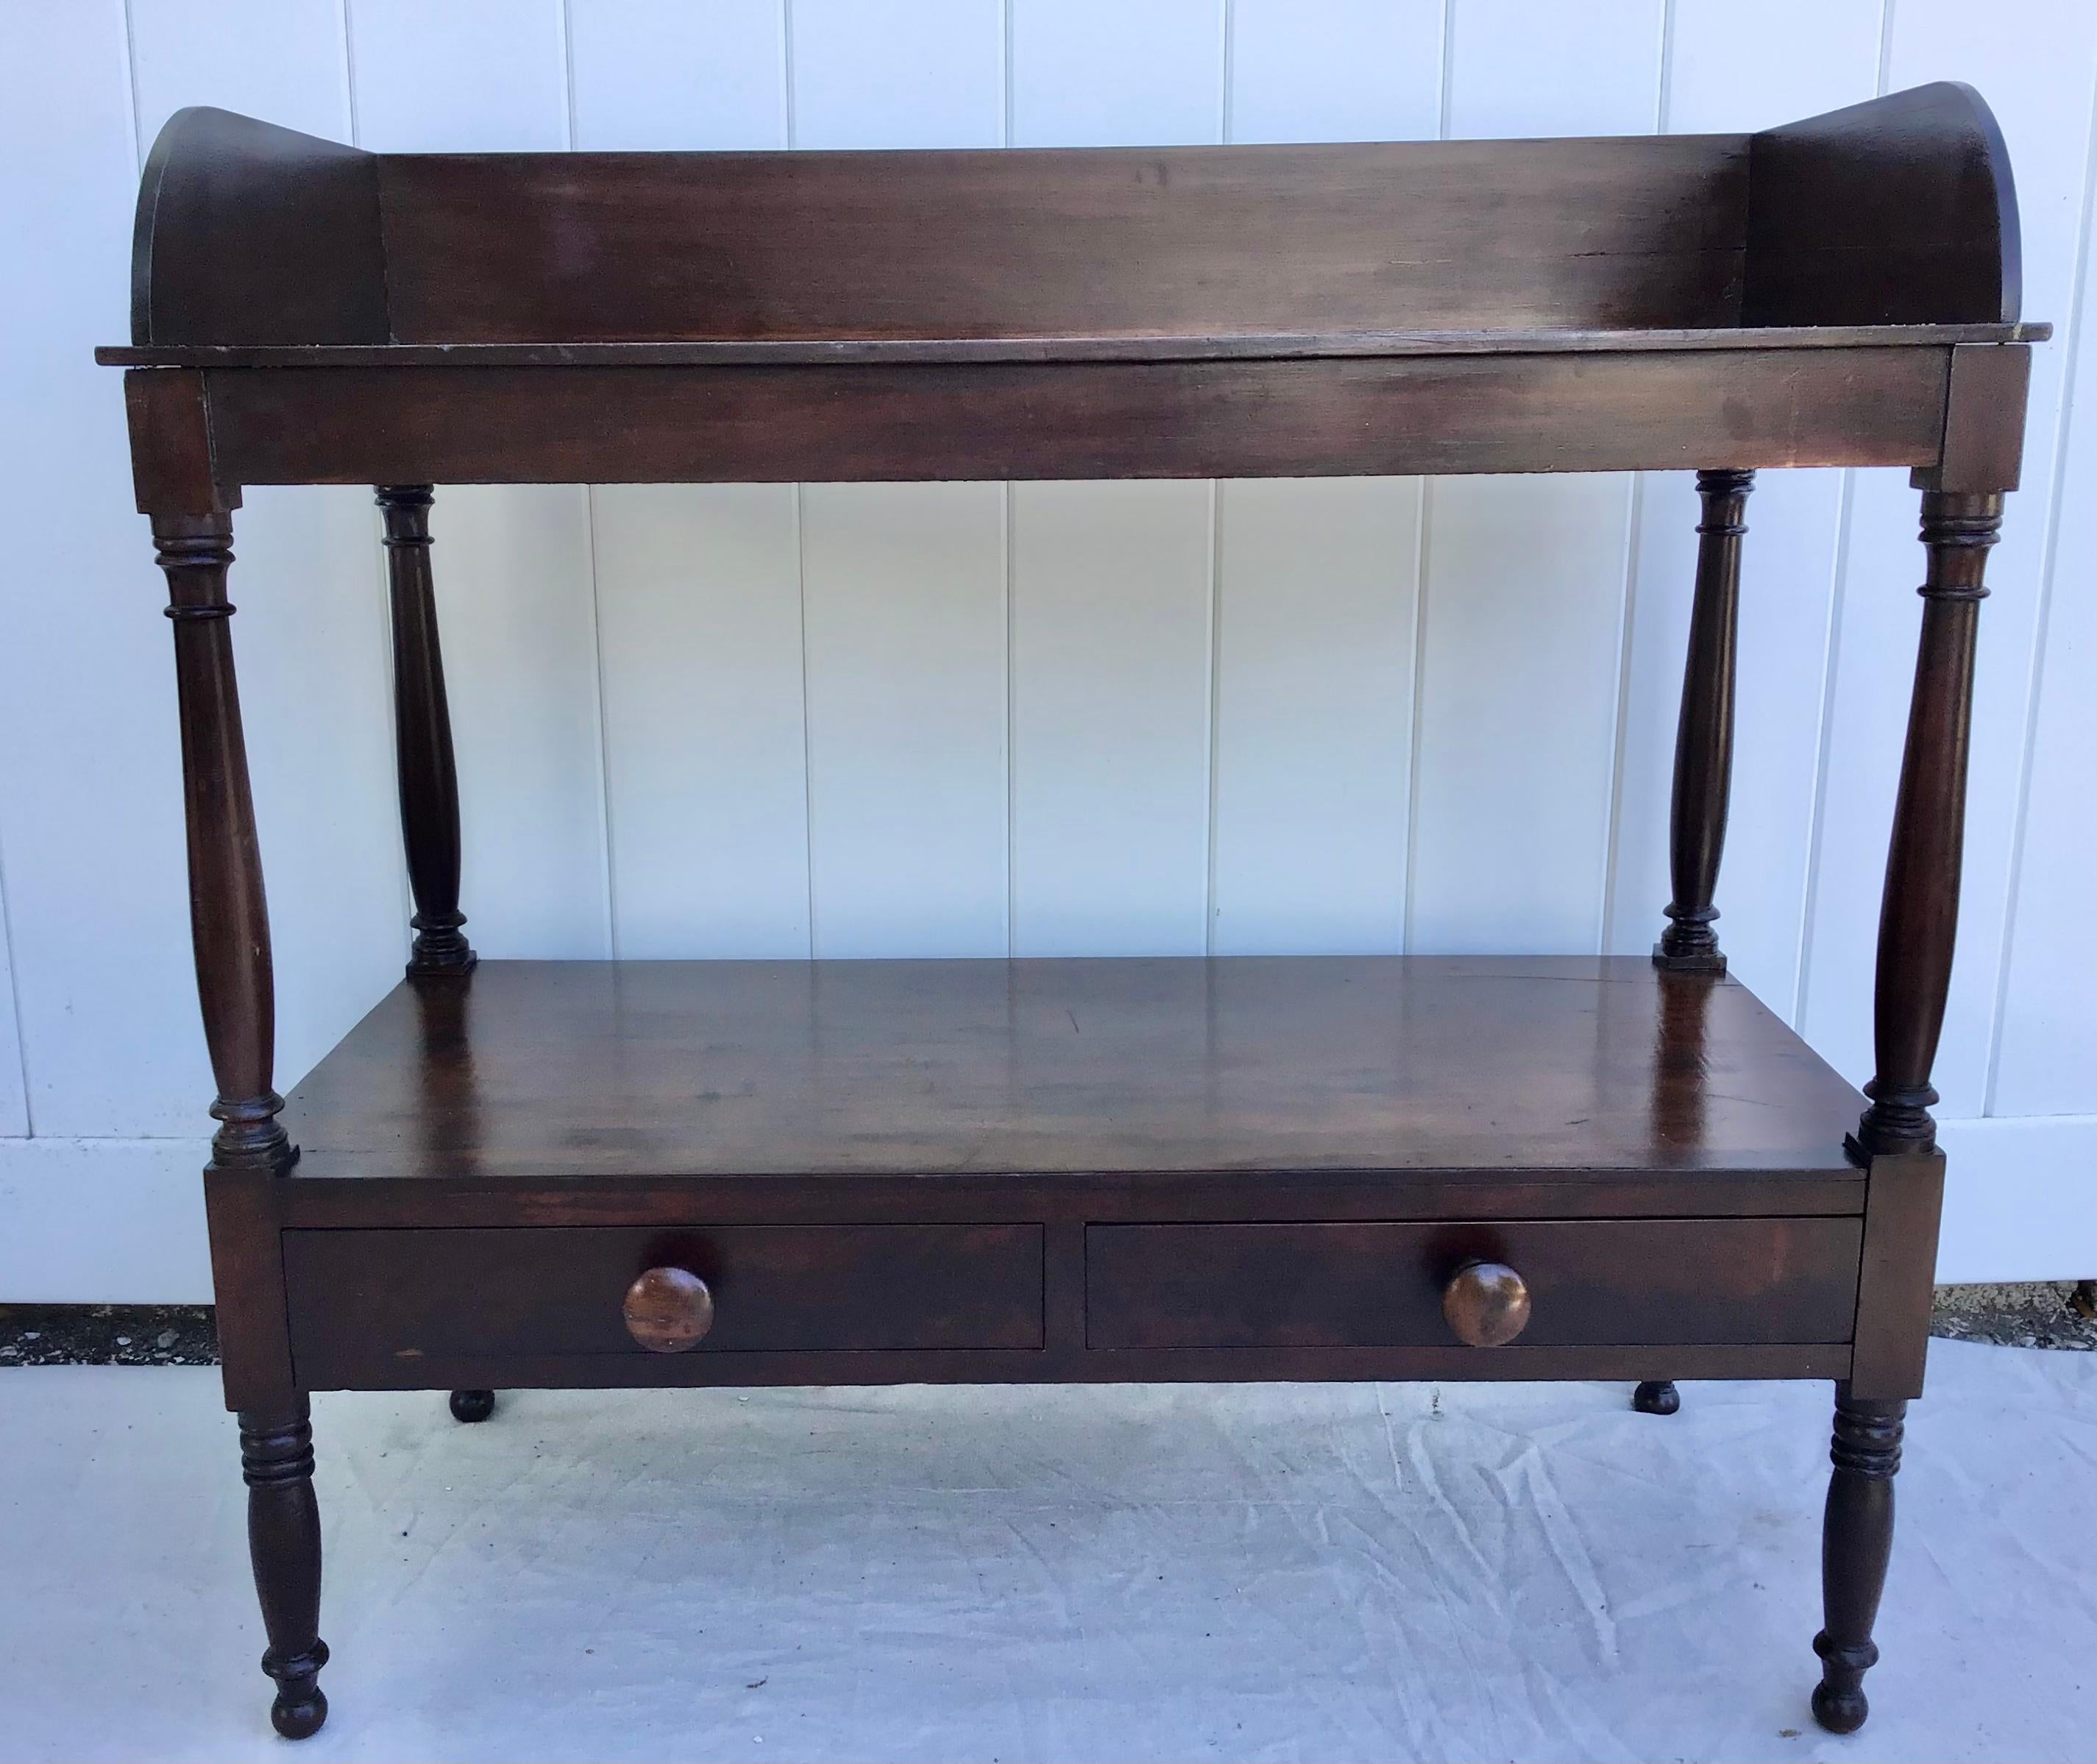 19th century mahogany Etagere featuring a slash back around the top. Two tiers ans two drawers. Standing on turned legs.